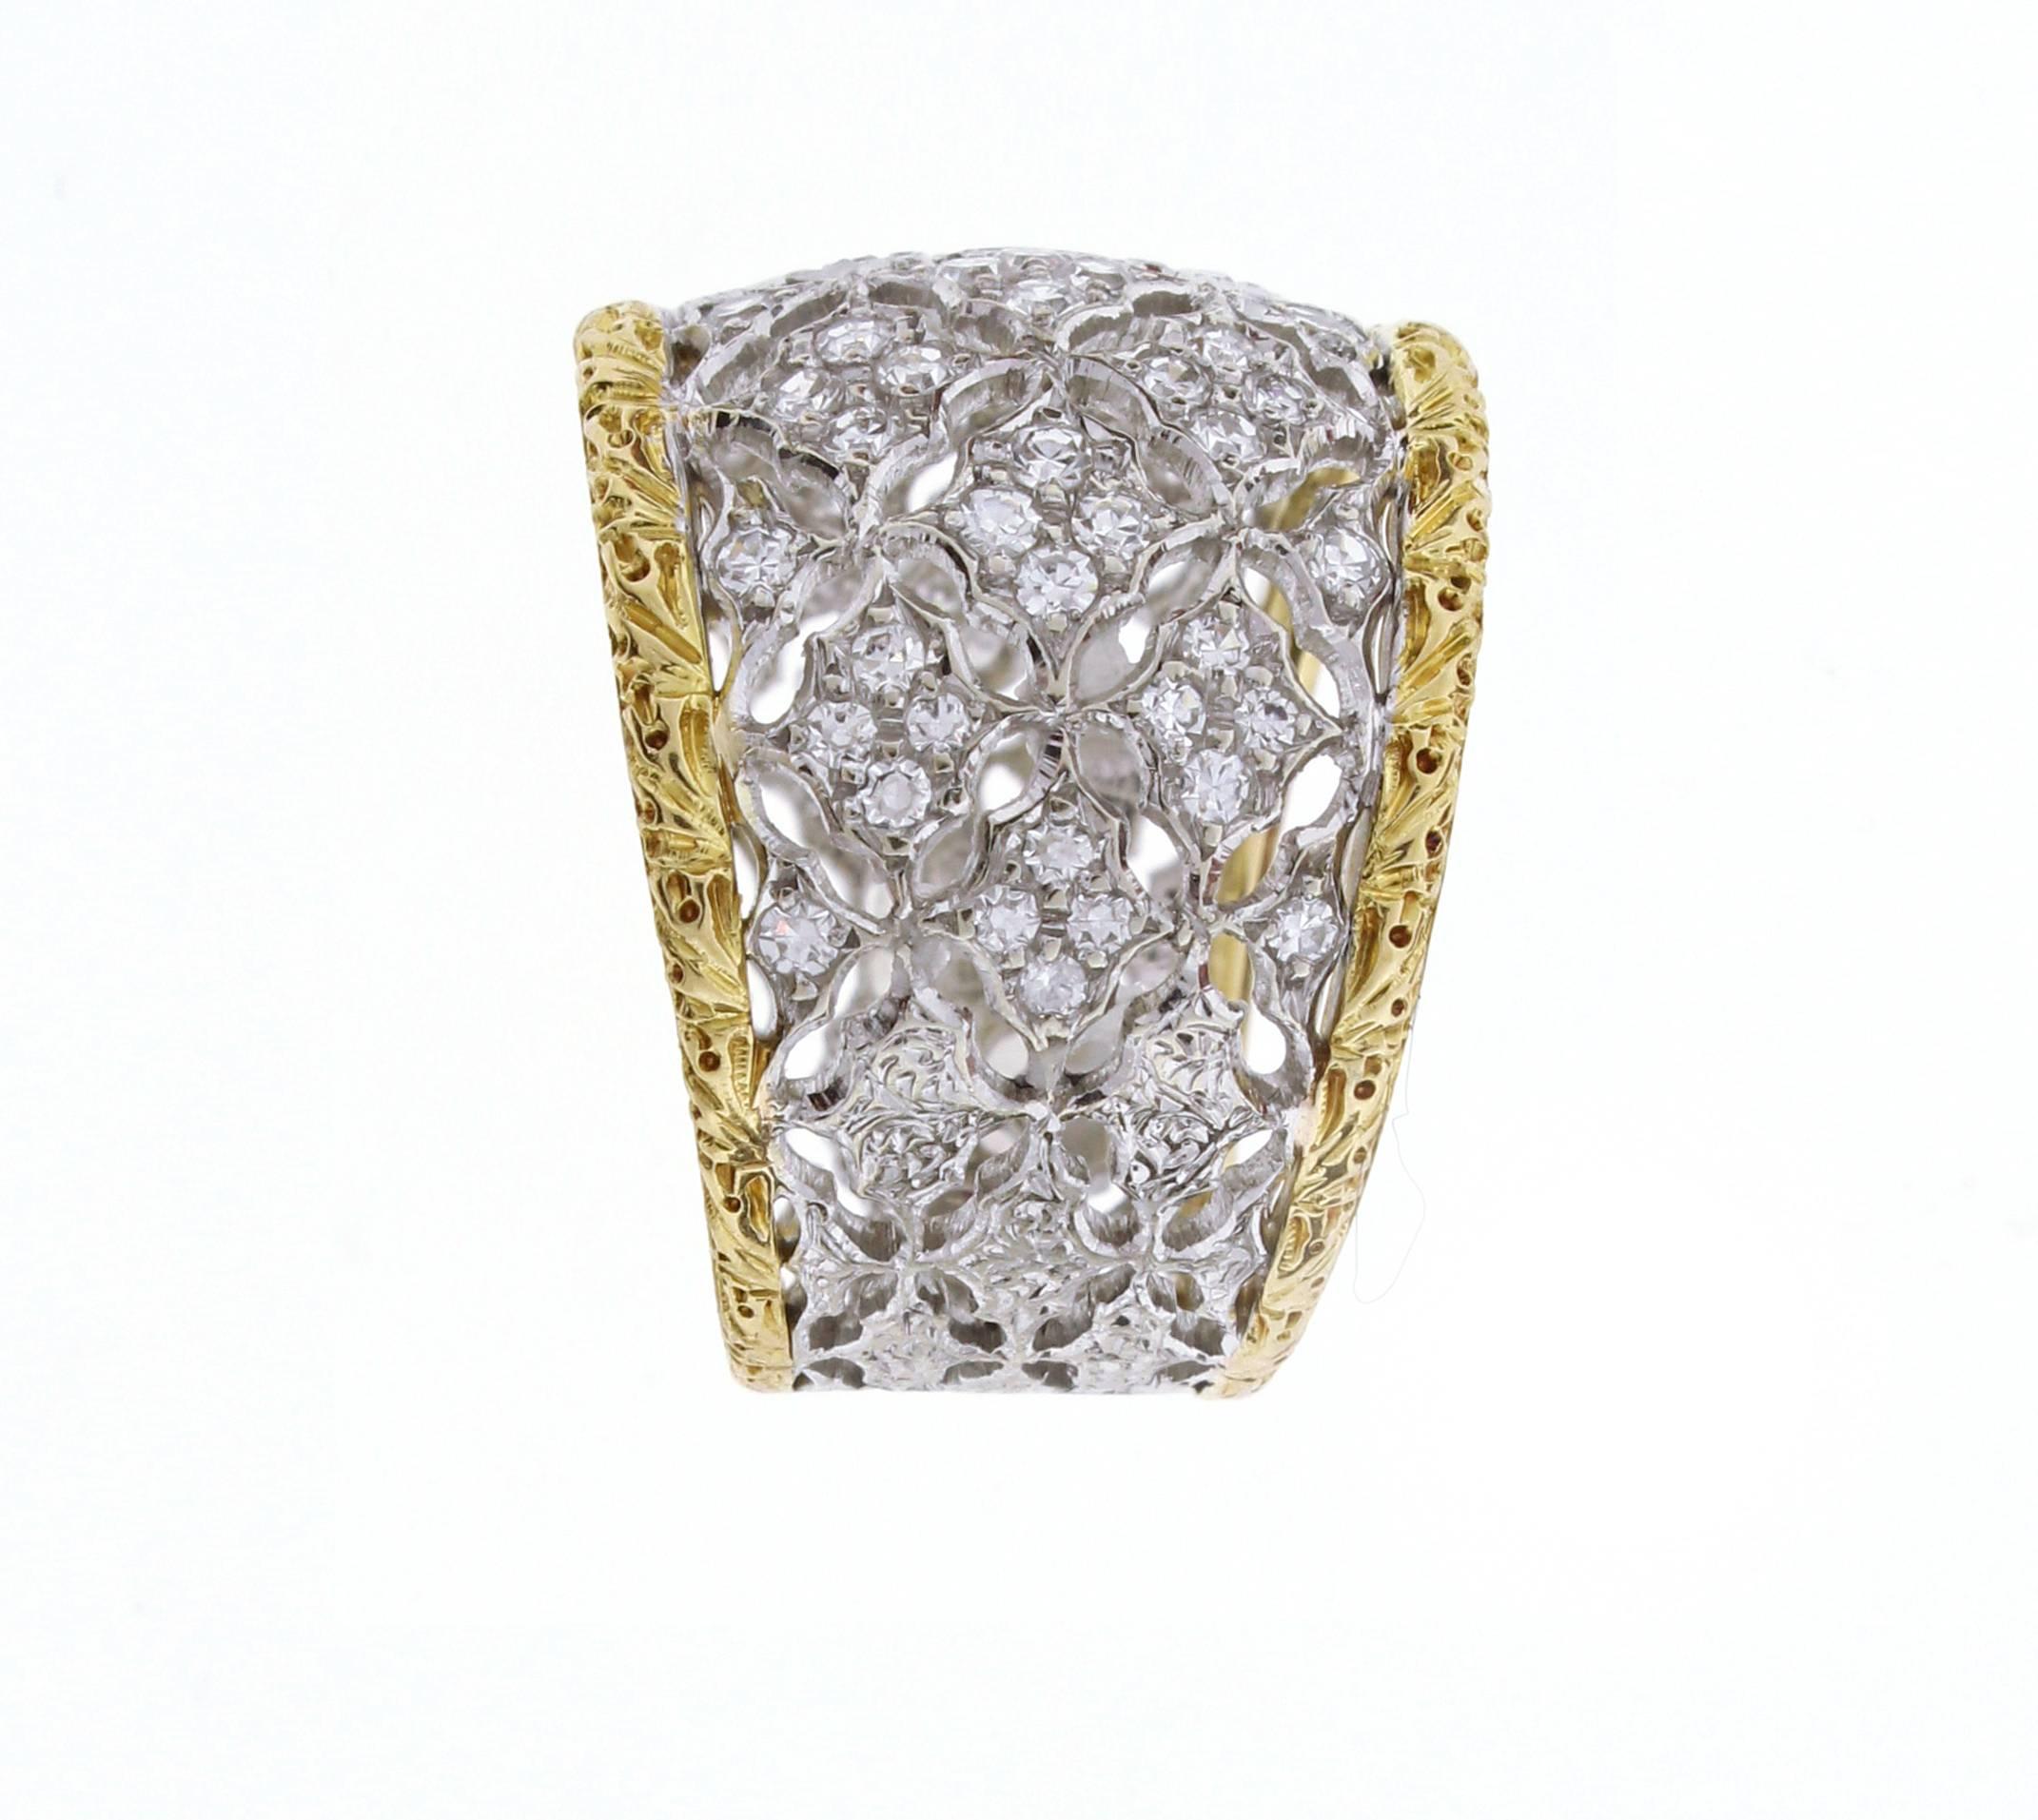  Federico Buccellati ring in 18 Karat yellow and white gold. 
This wide diamond ring features white gold filigree set with sixty two brilliant cut diamonds weighing .60 carats edged with yellow gold filigree. The ring tapers from 16mm to 10mm 8.4